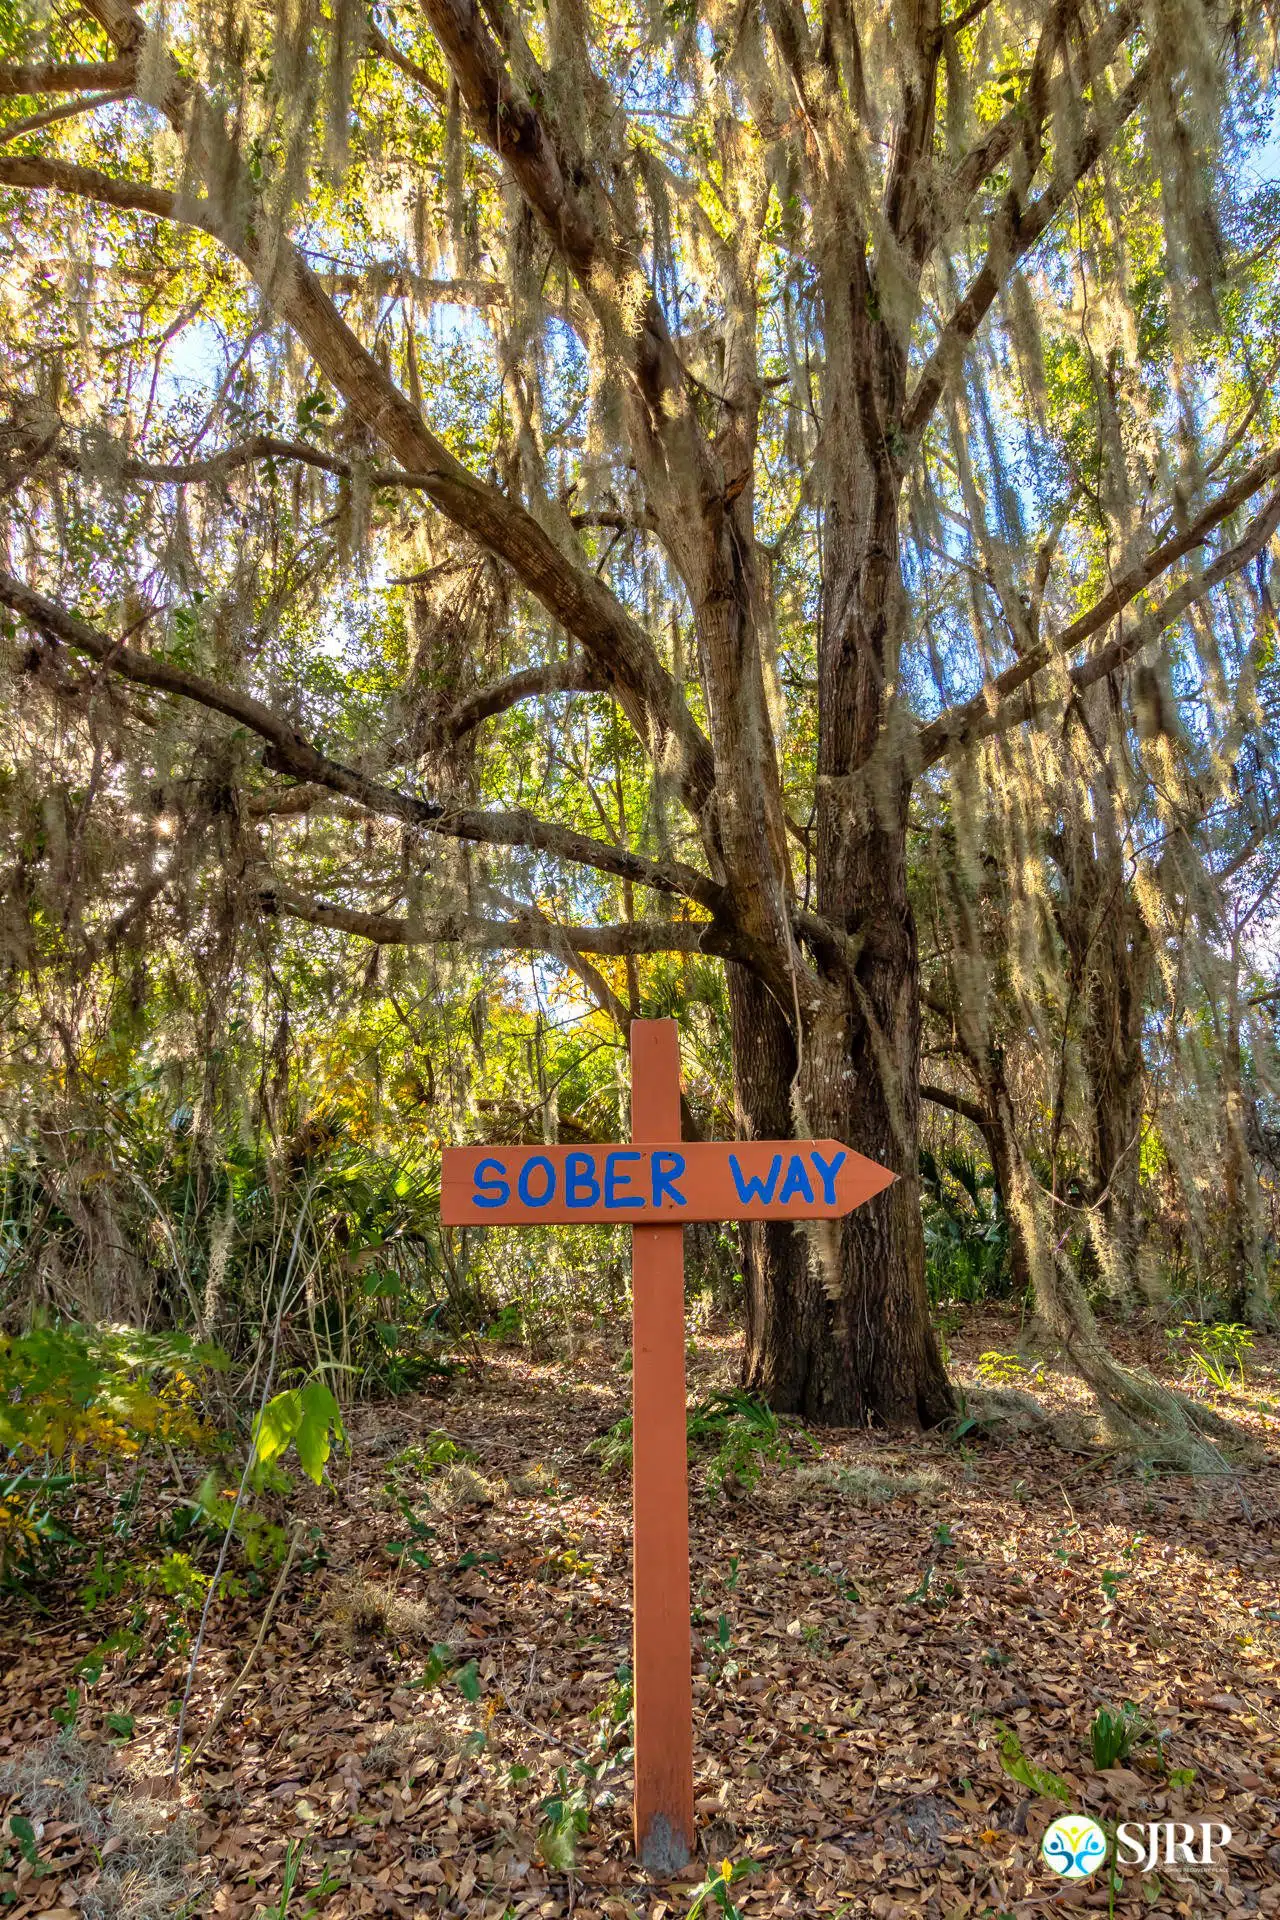 Wooded area with large mossy tree and an orange stake with sign saying "Sober Way"